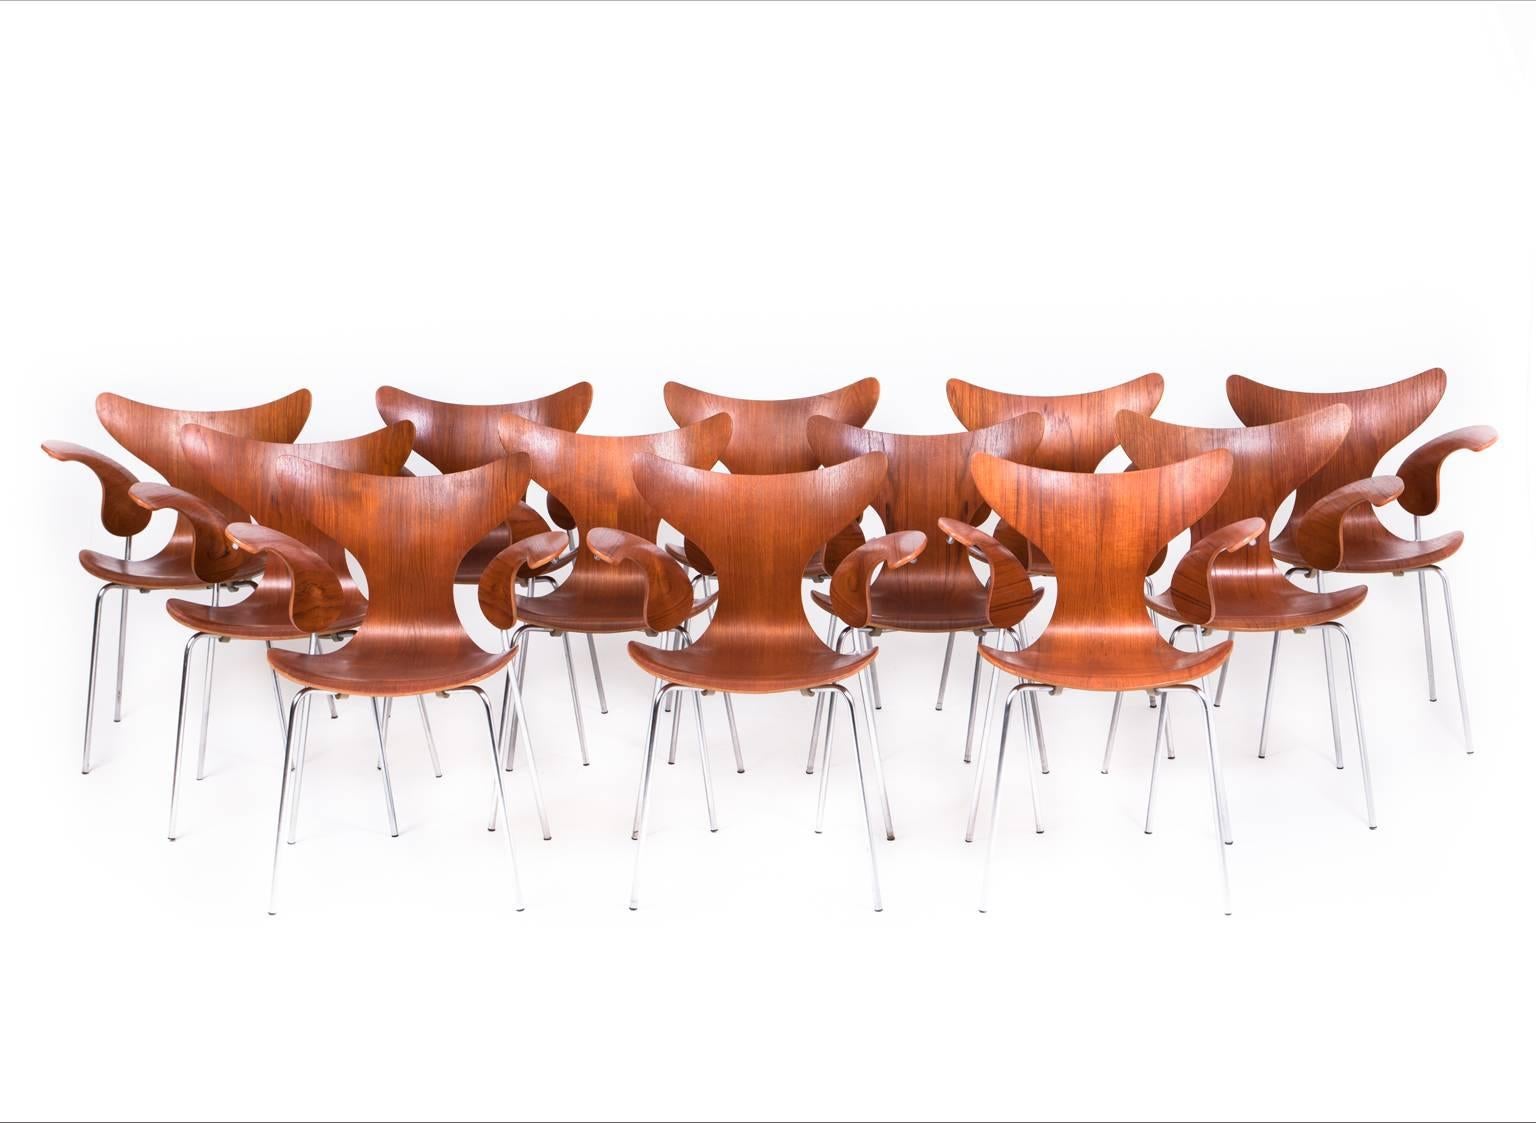 Arne Jacobsen Set of 12 Seagull Chairs in Teak For Sale 2